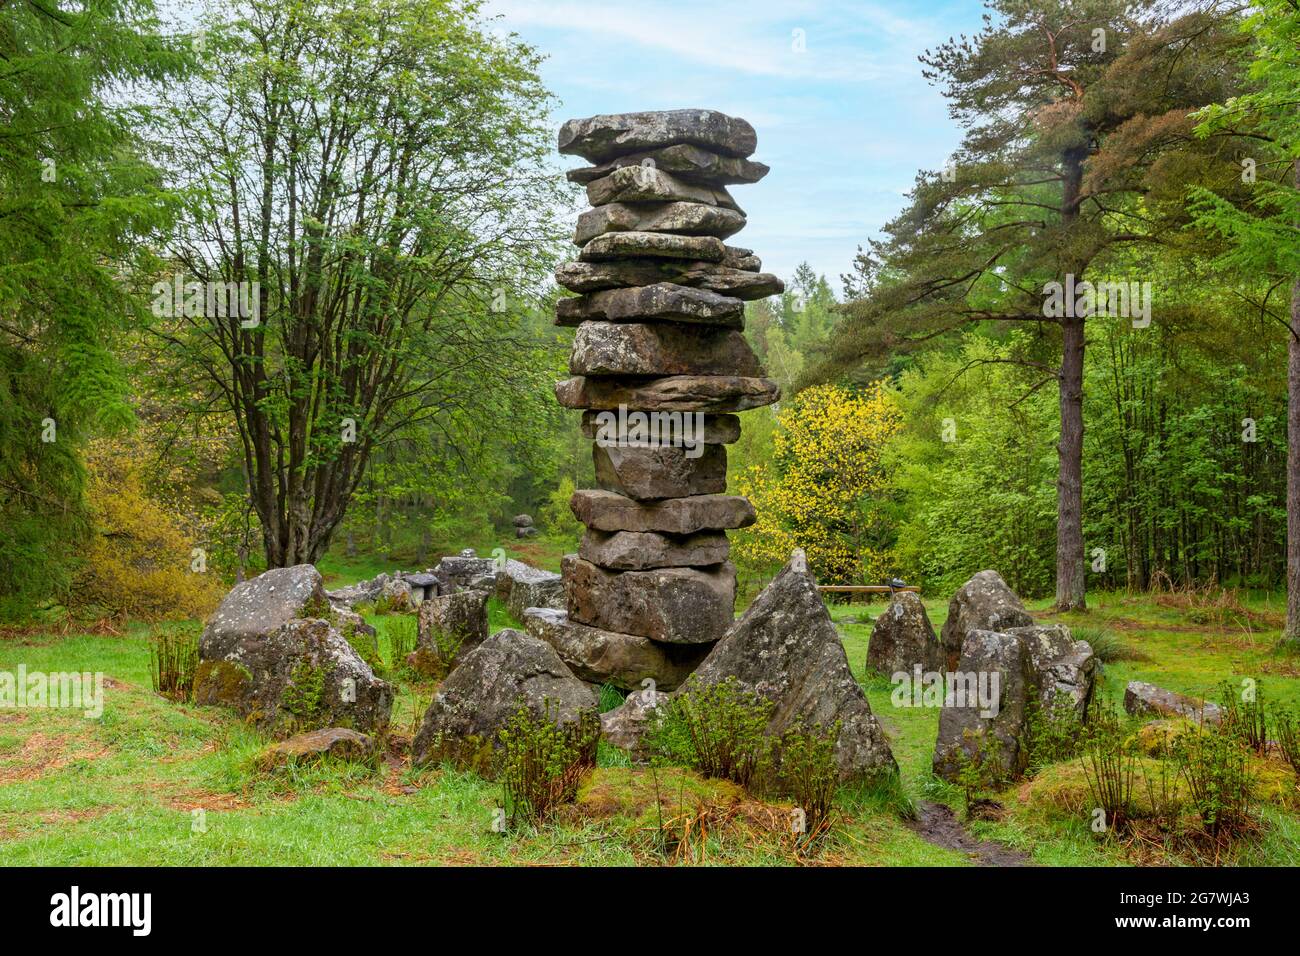 Rock column at the Druid's Temple, a folly built in the late 1700s or early 1800s by William Danby.  Near Masham, Yorkshire, England, UK. Stock Photo